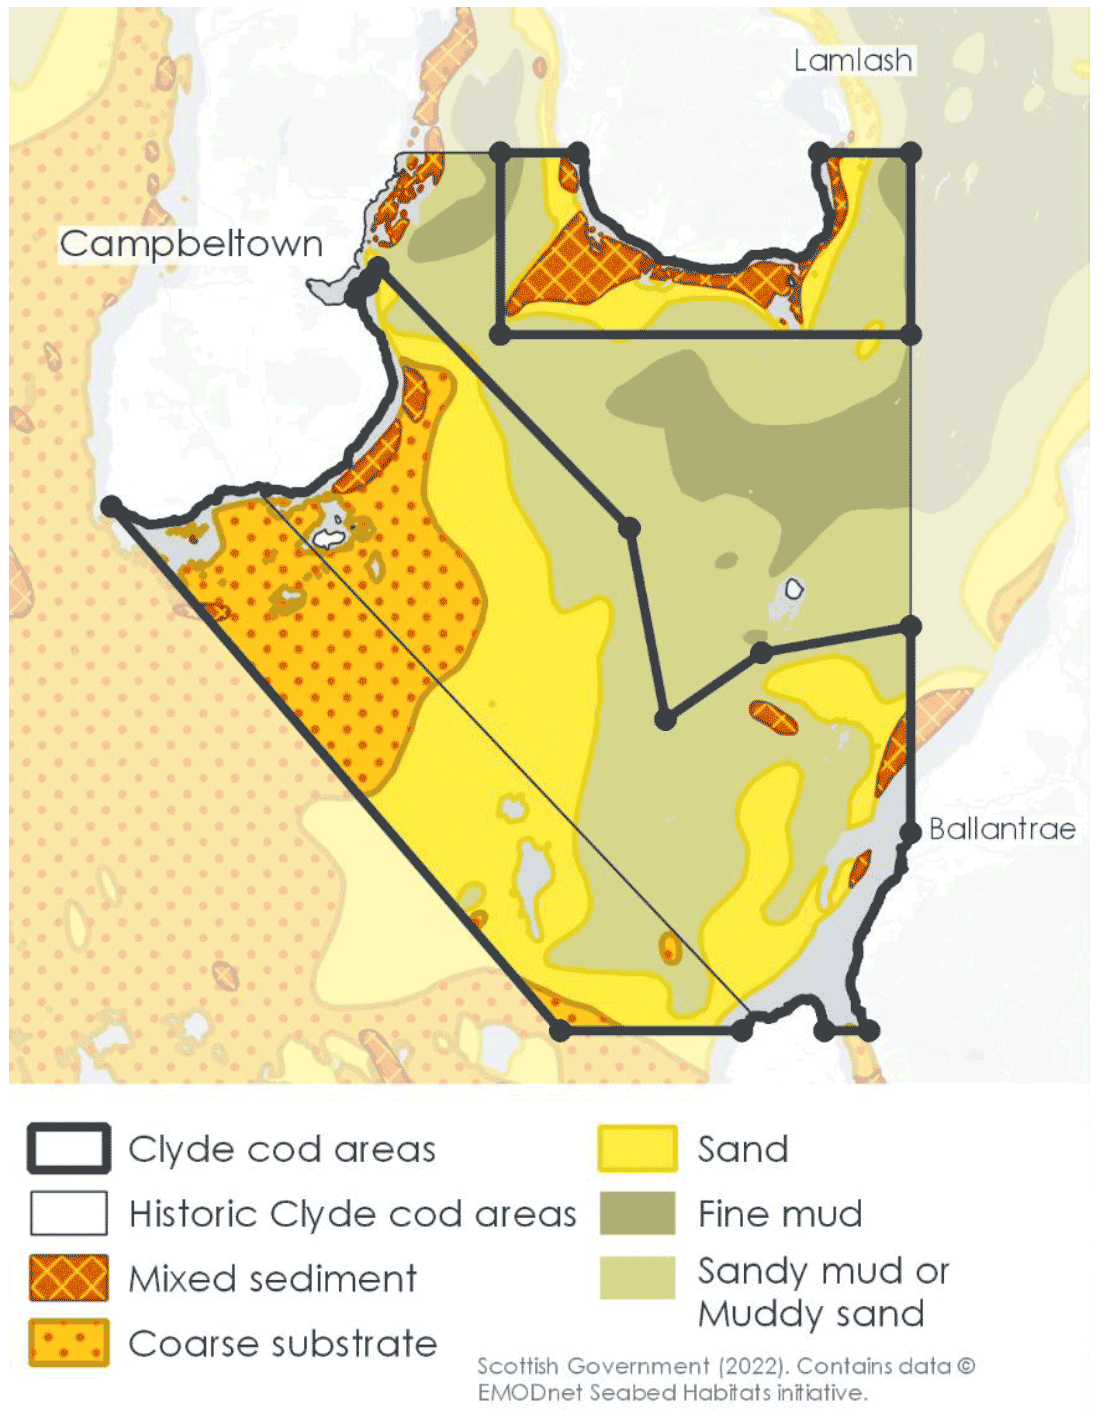 sediment distribution in the Clyde, overlaid with the historic closure area and the smaller, more focused 2022-2023 closure area. The 2022-23 closure area principally covers the following sediment types: mixed sediment, coarse substrate, sand and sandy mud/muddy sand.